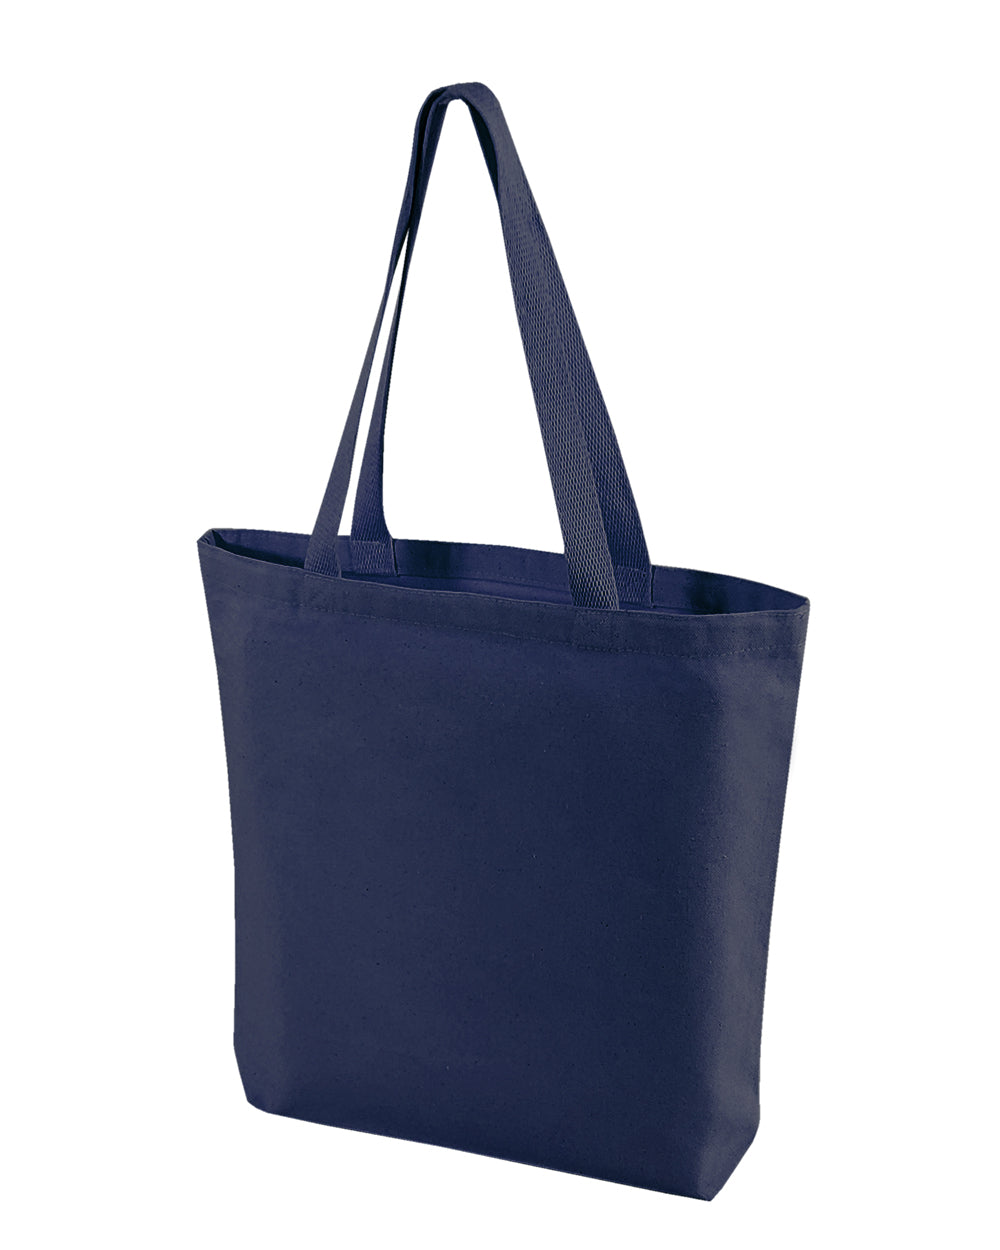 12 ct High Quality Promotional Canvas Tote Bags w/Gusset - By Dozen